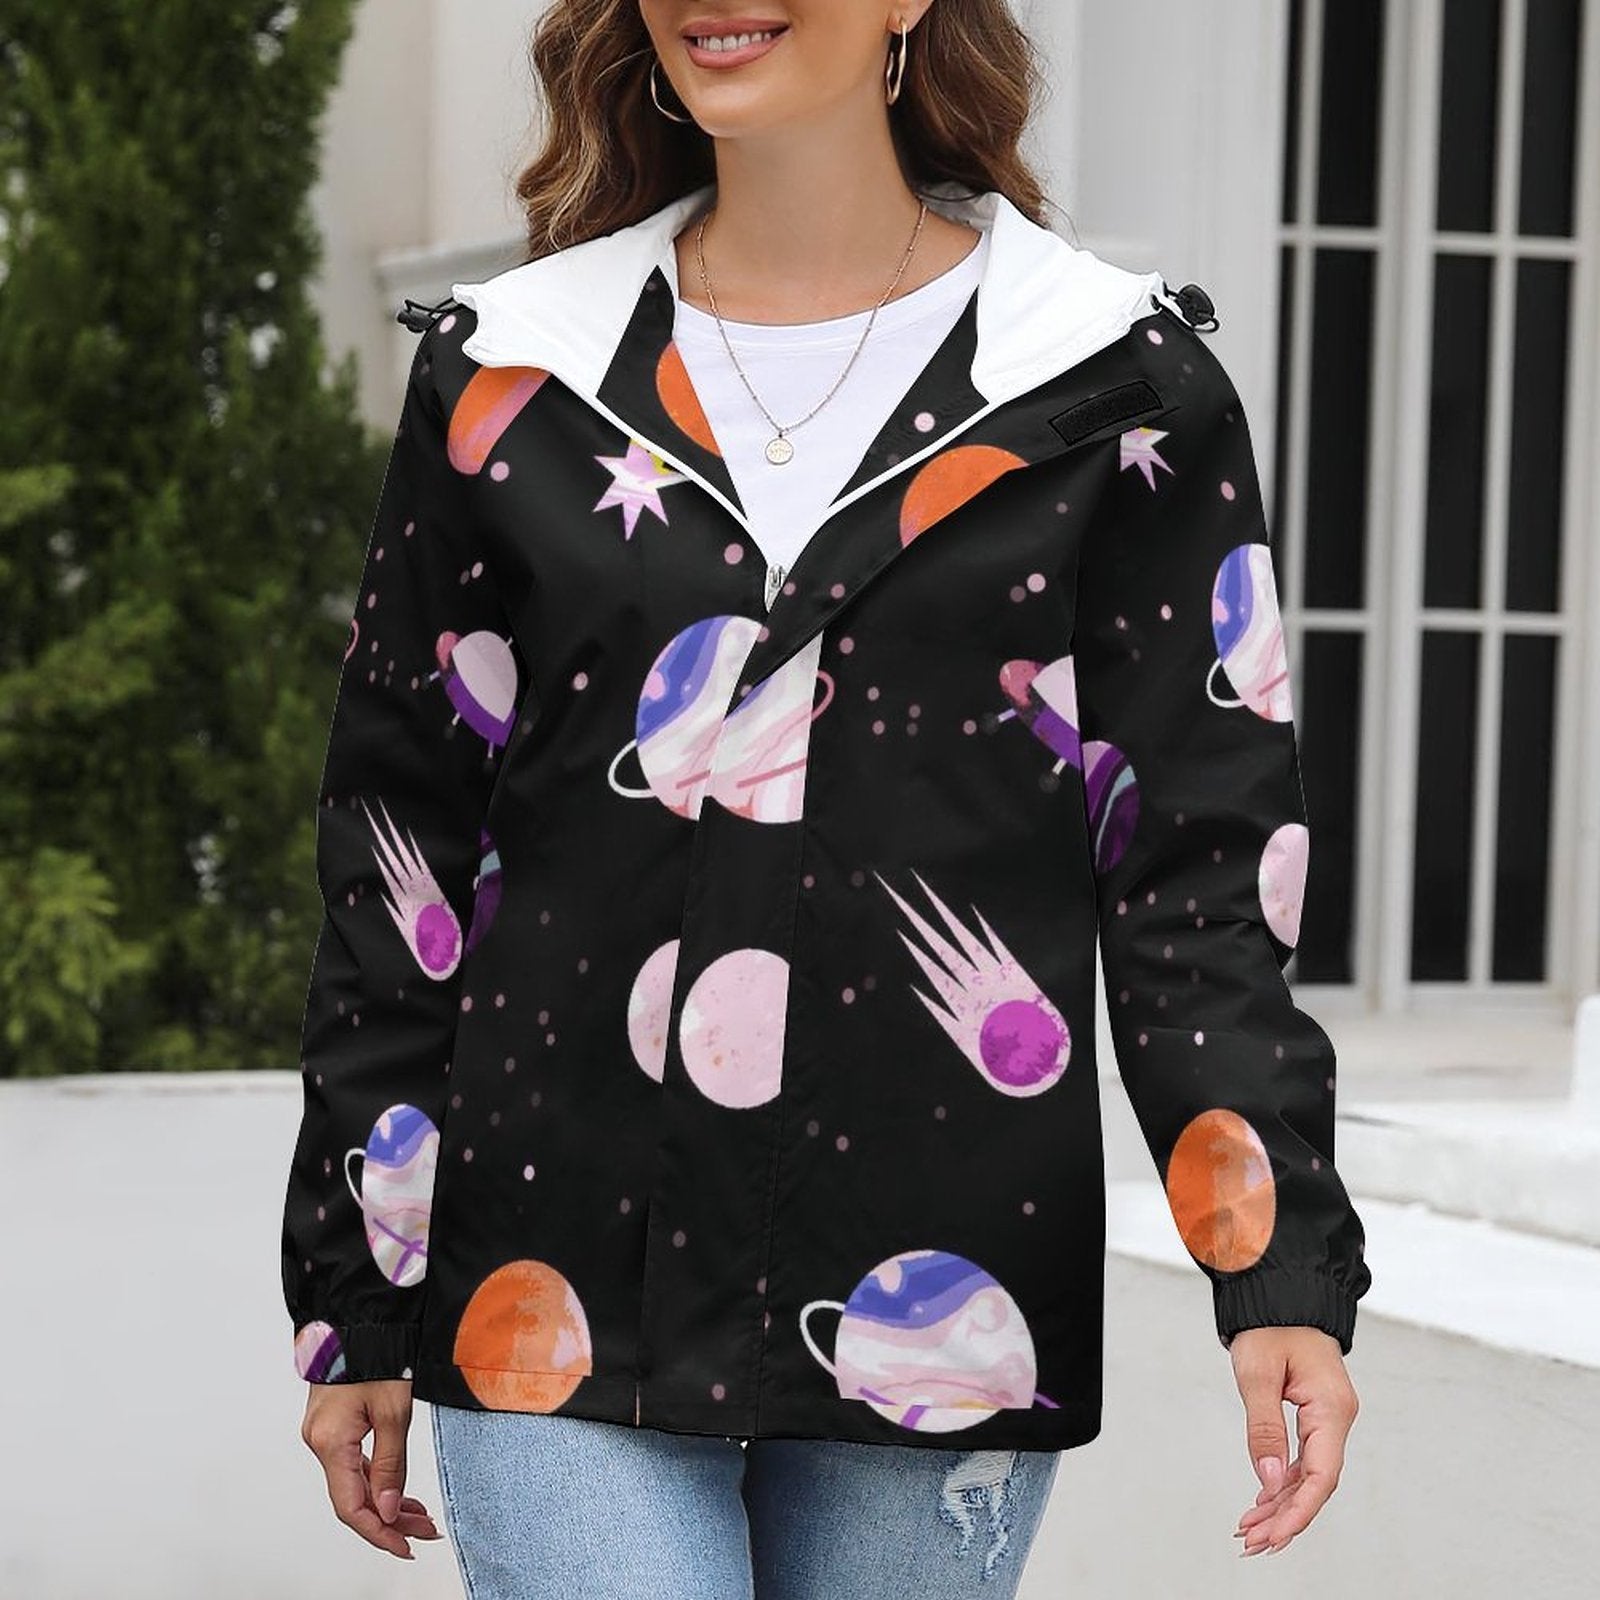 Women Velcro Thin Jacket A541 Women's Jacket with Velcro Custom Design Printing with Your Photos or Text